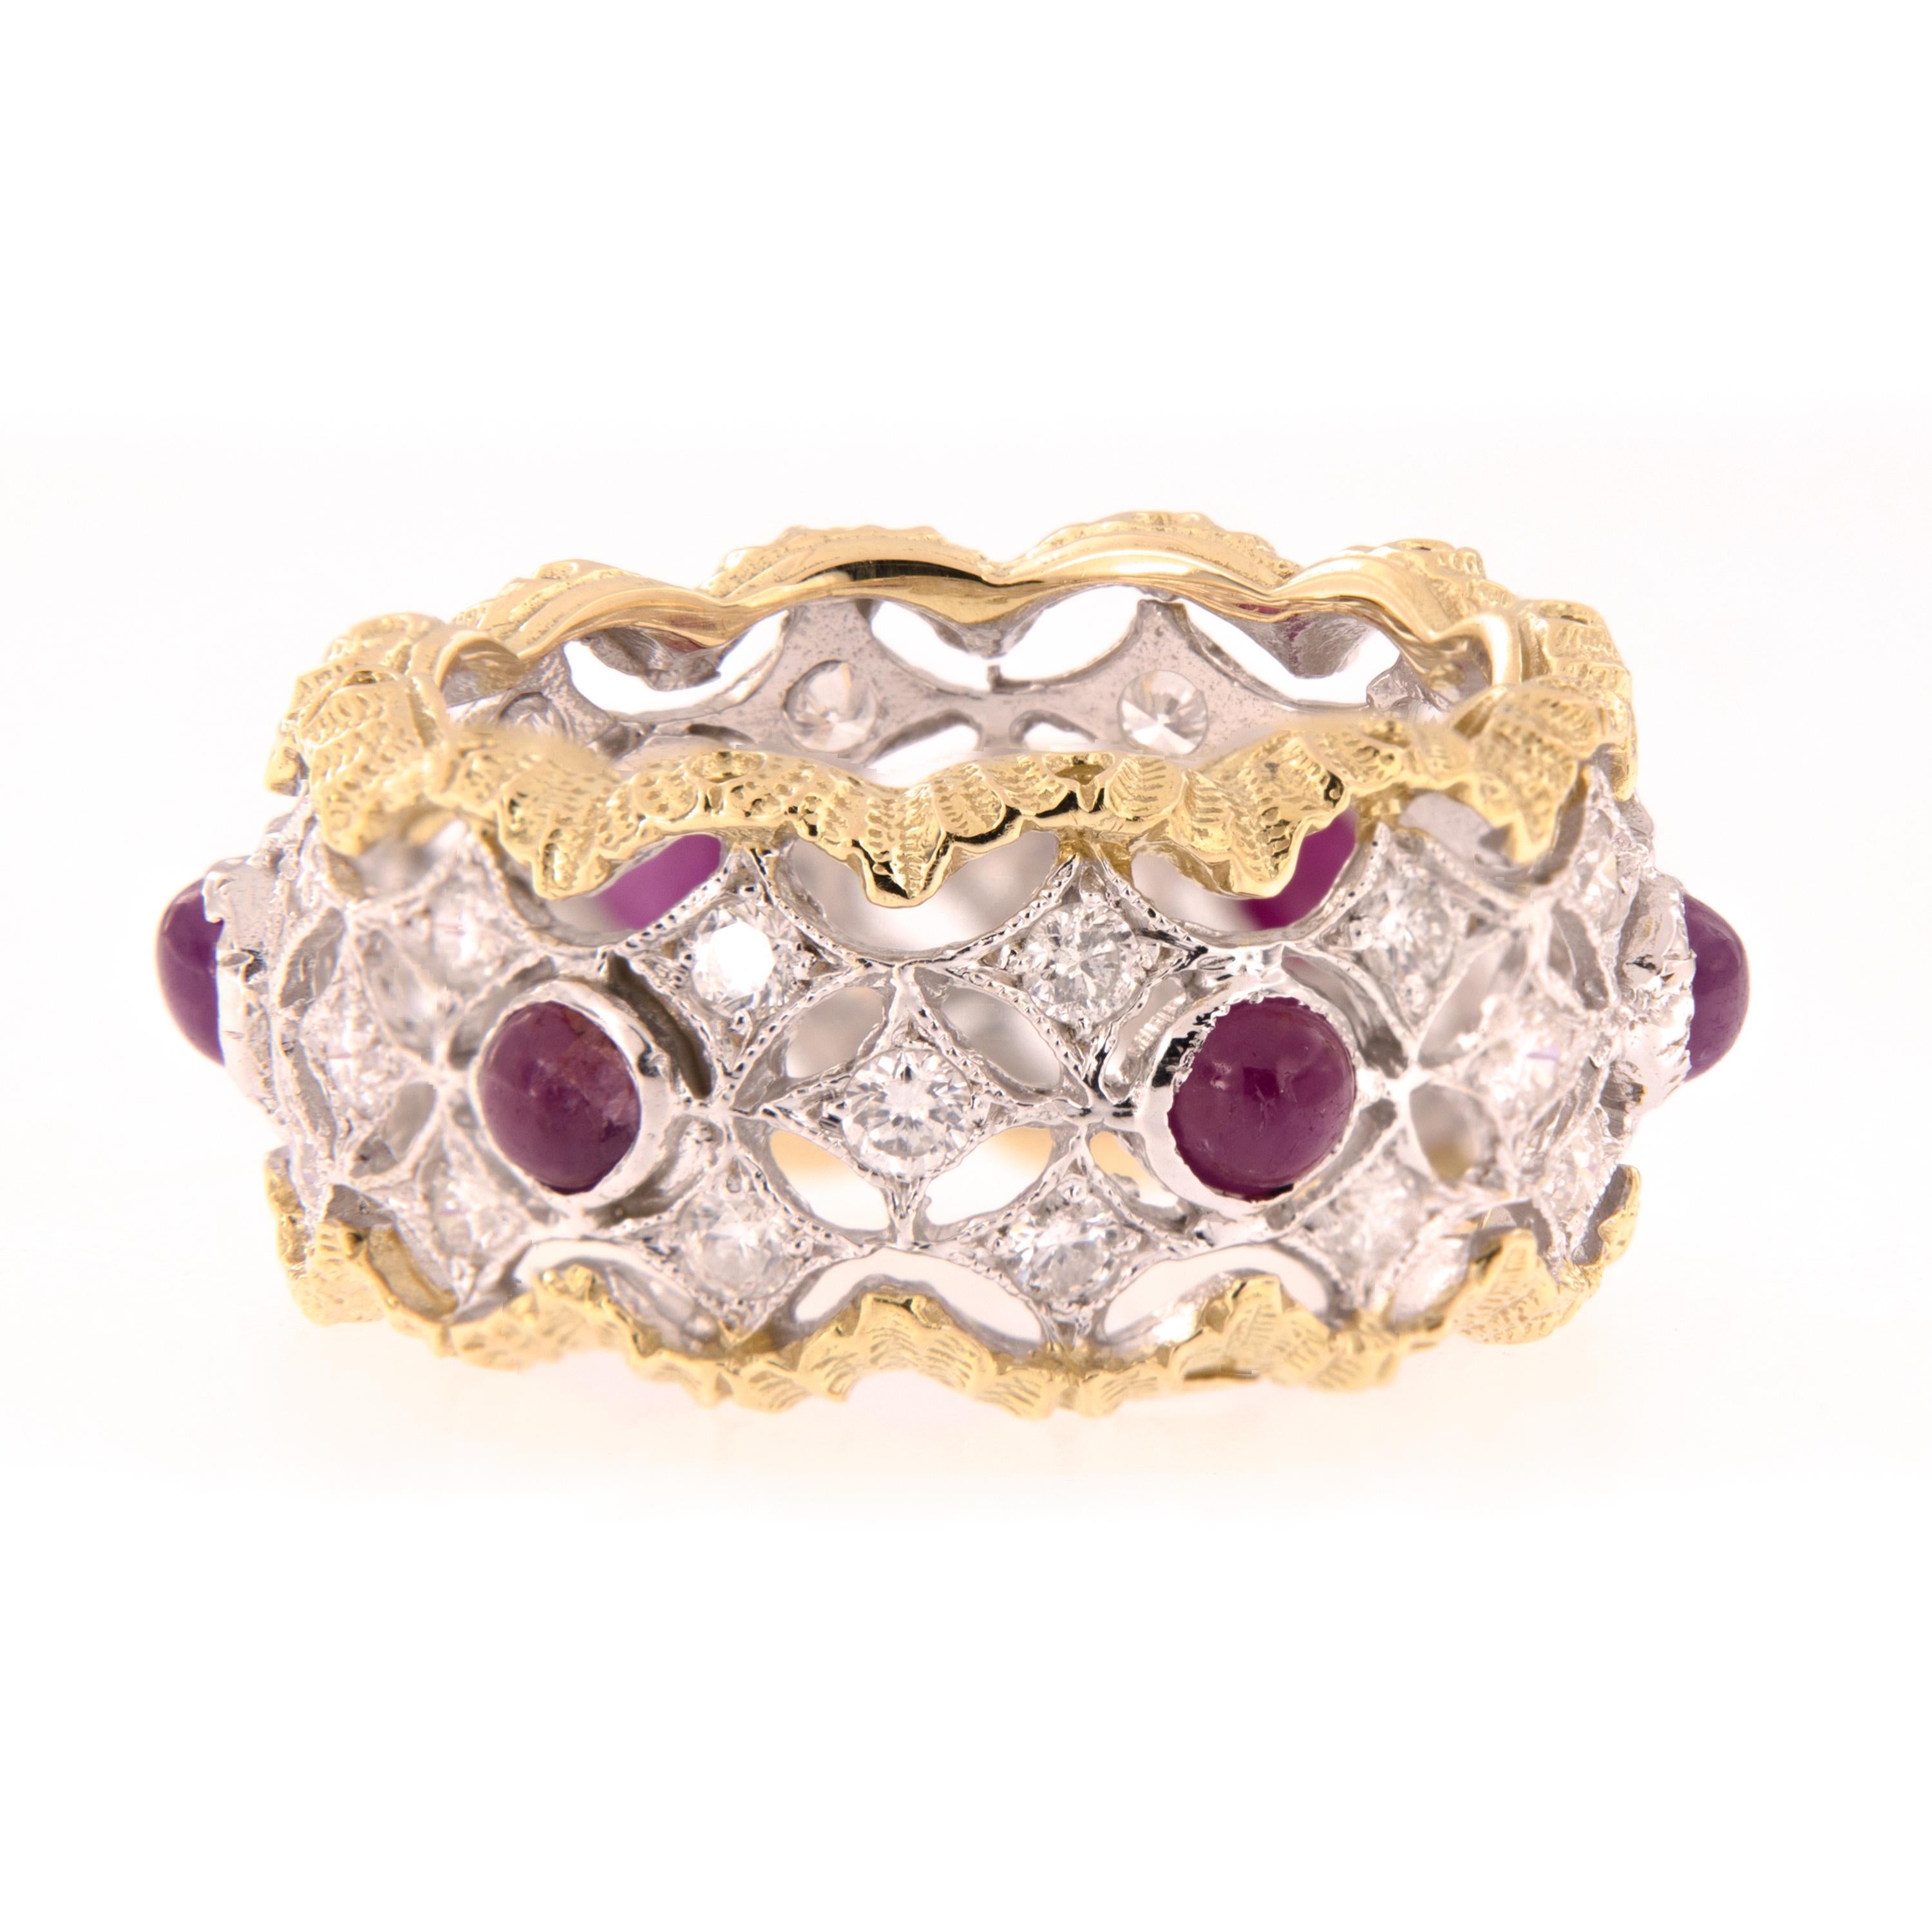 This ring showcases expert Italian craftsmanship of openwork design in 18k white gold and scalloped 18k yellow gold borders. Ring features six round cabochon rubies and white diamonds. Ring size 5.5. Weighs 6.8 grams. Marked Italy.

Ruby 1.07